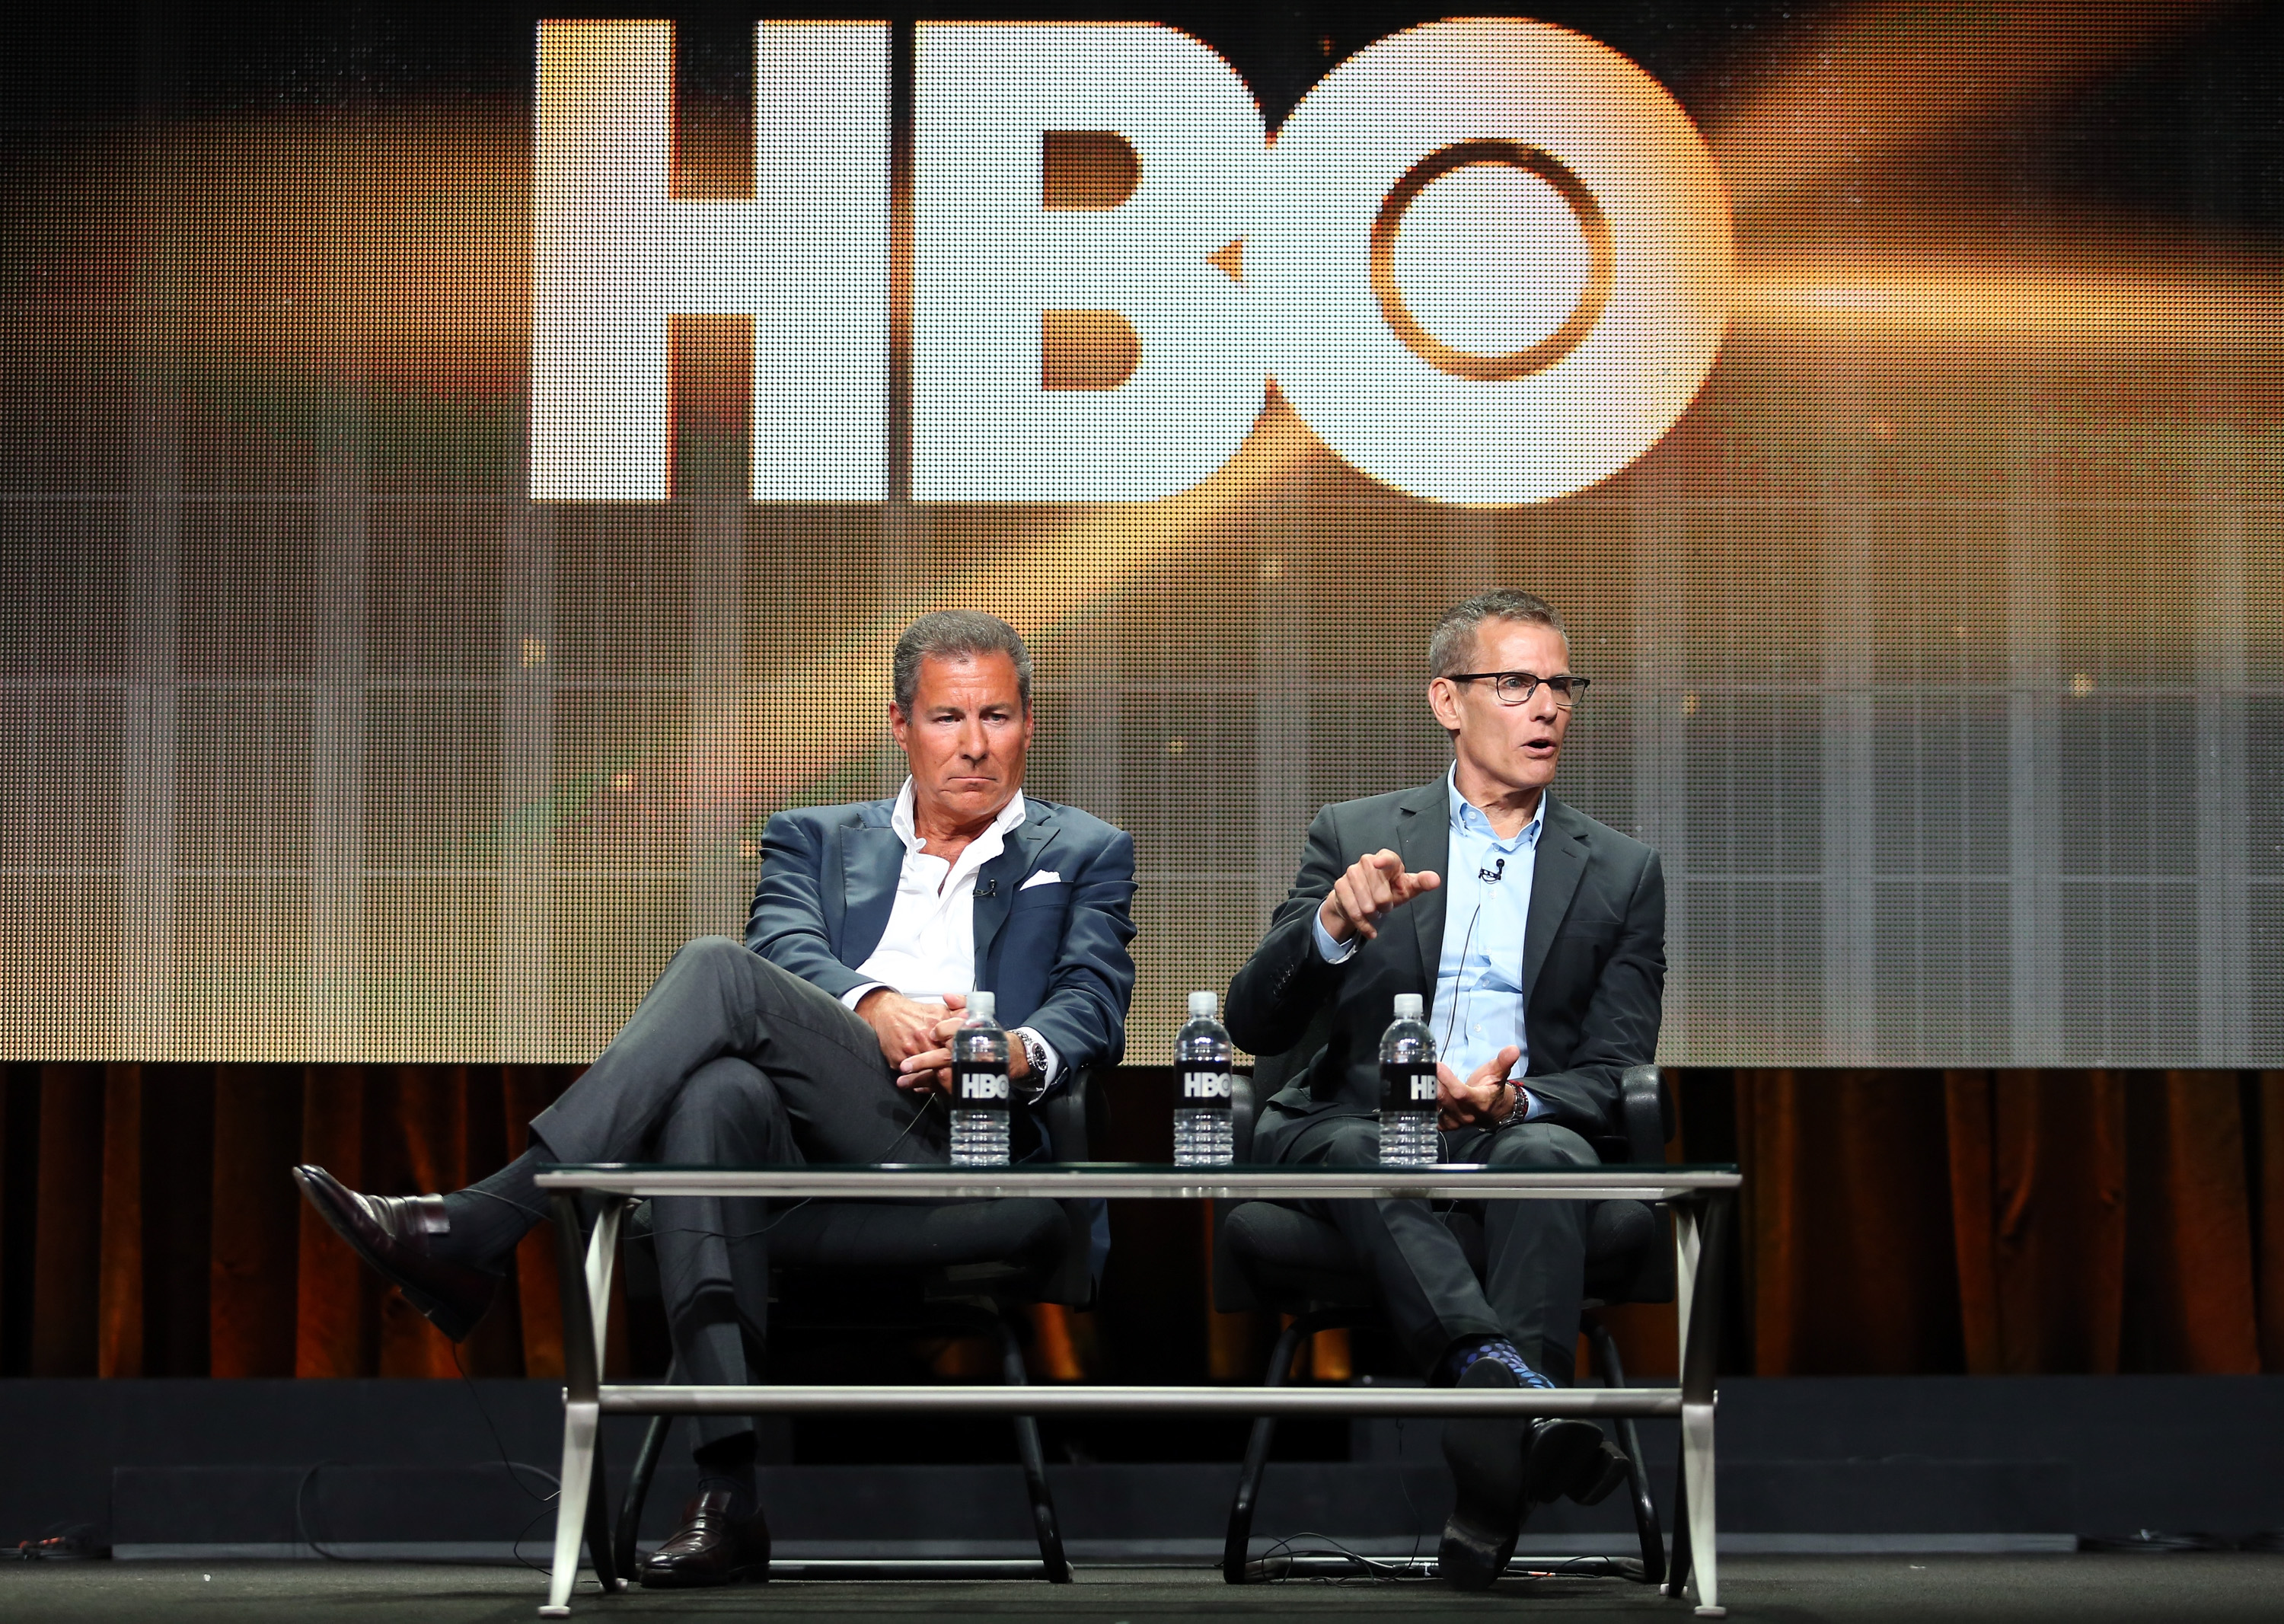 HBO Chairman and CEO Richard Plepler and HBO Programming President Michael Lombardo speak onstage at the Executive Session panel during the HBO portion of the 2014 Summer Television Critics Association on July 10, 2014 in Beverly Hills.